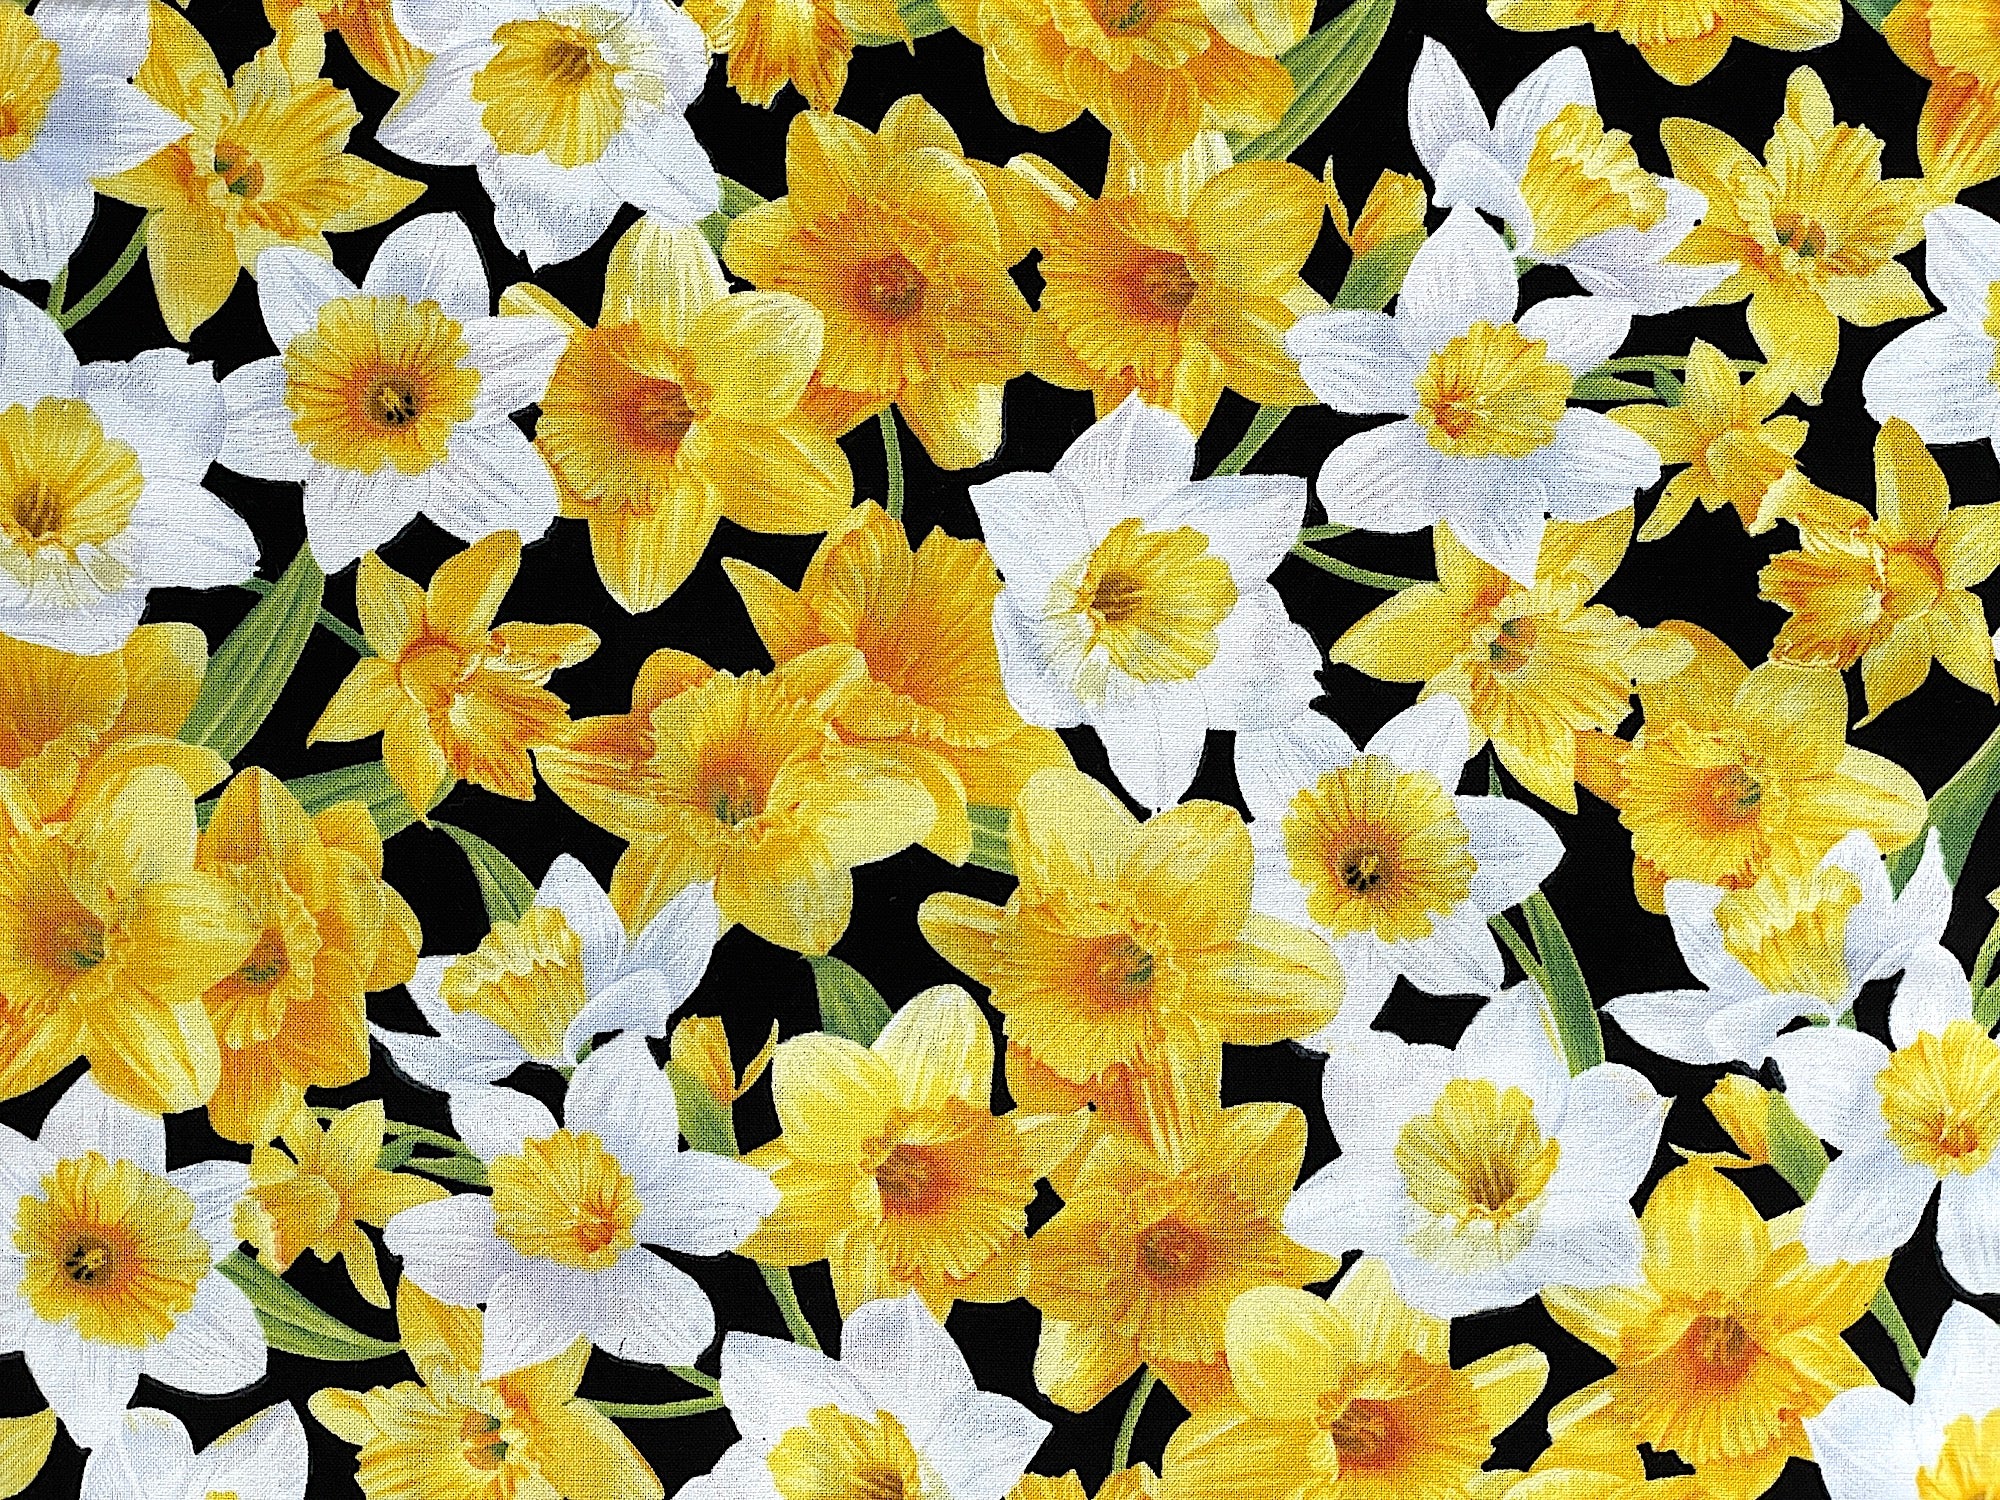 Black cotton fabric covered with yellow and white daffodils and green leaves.